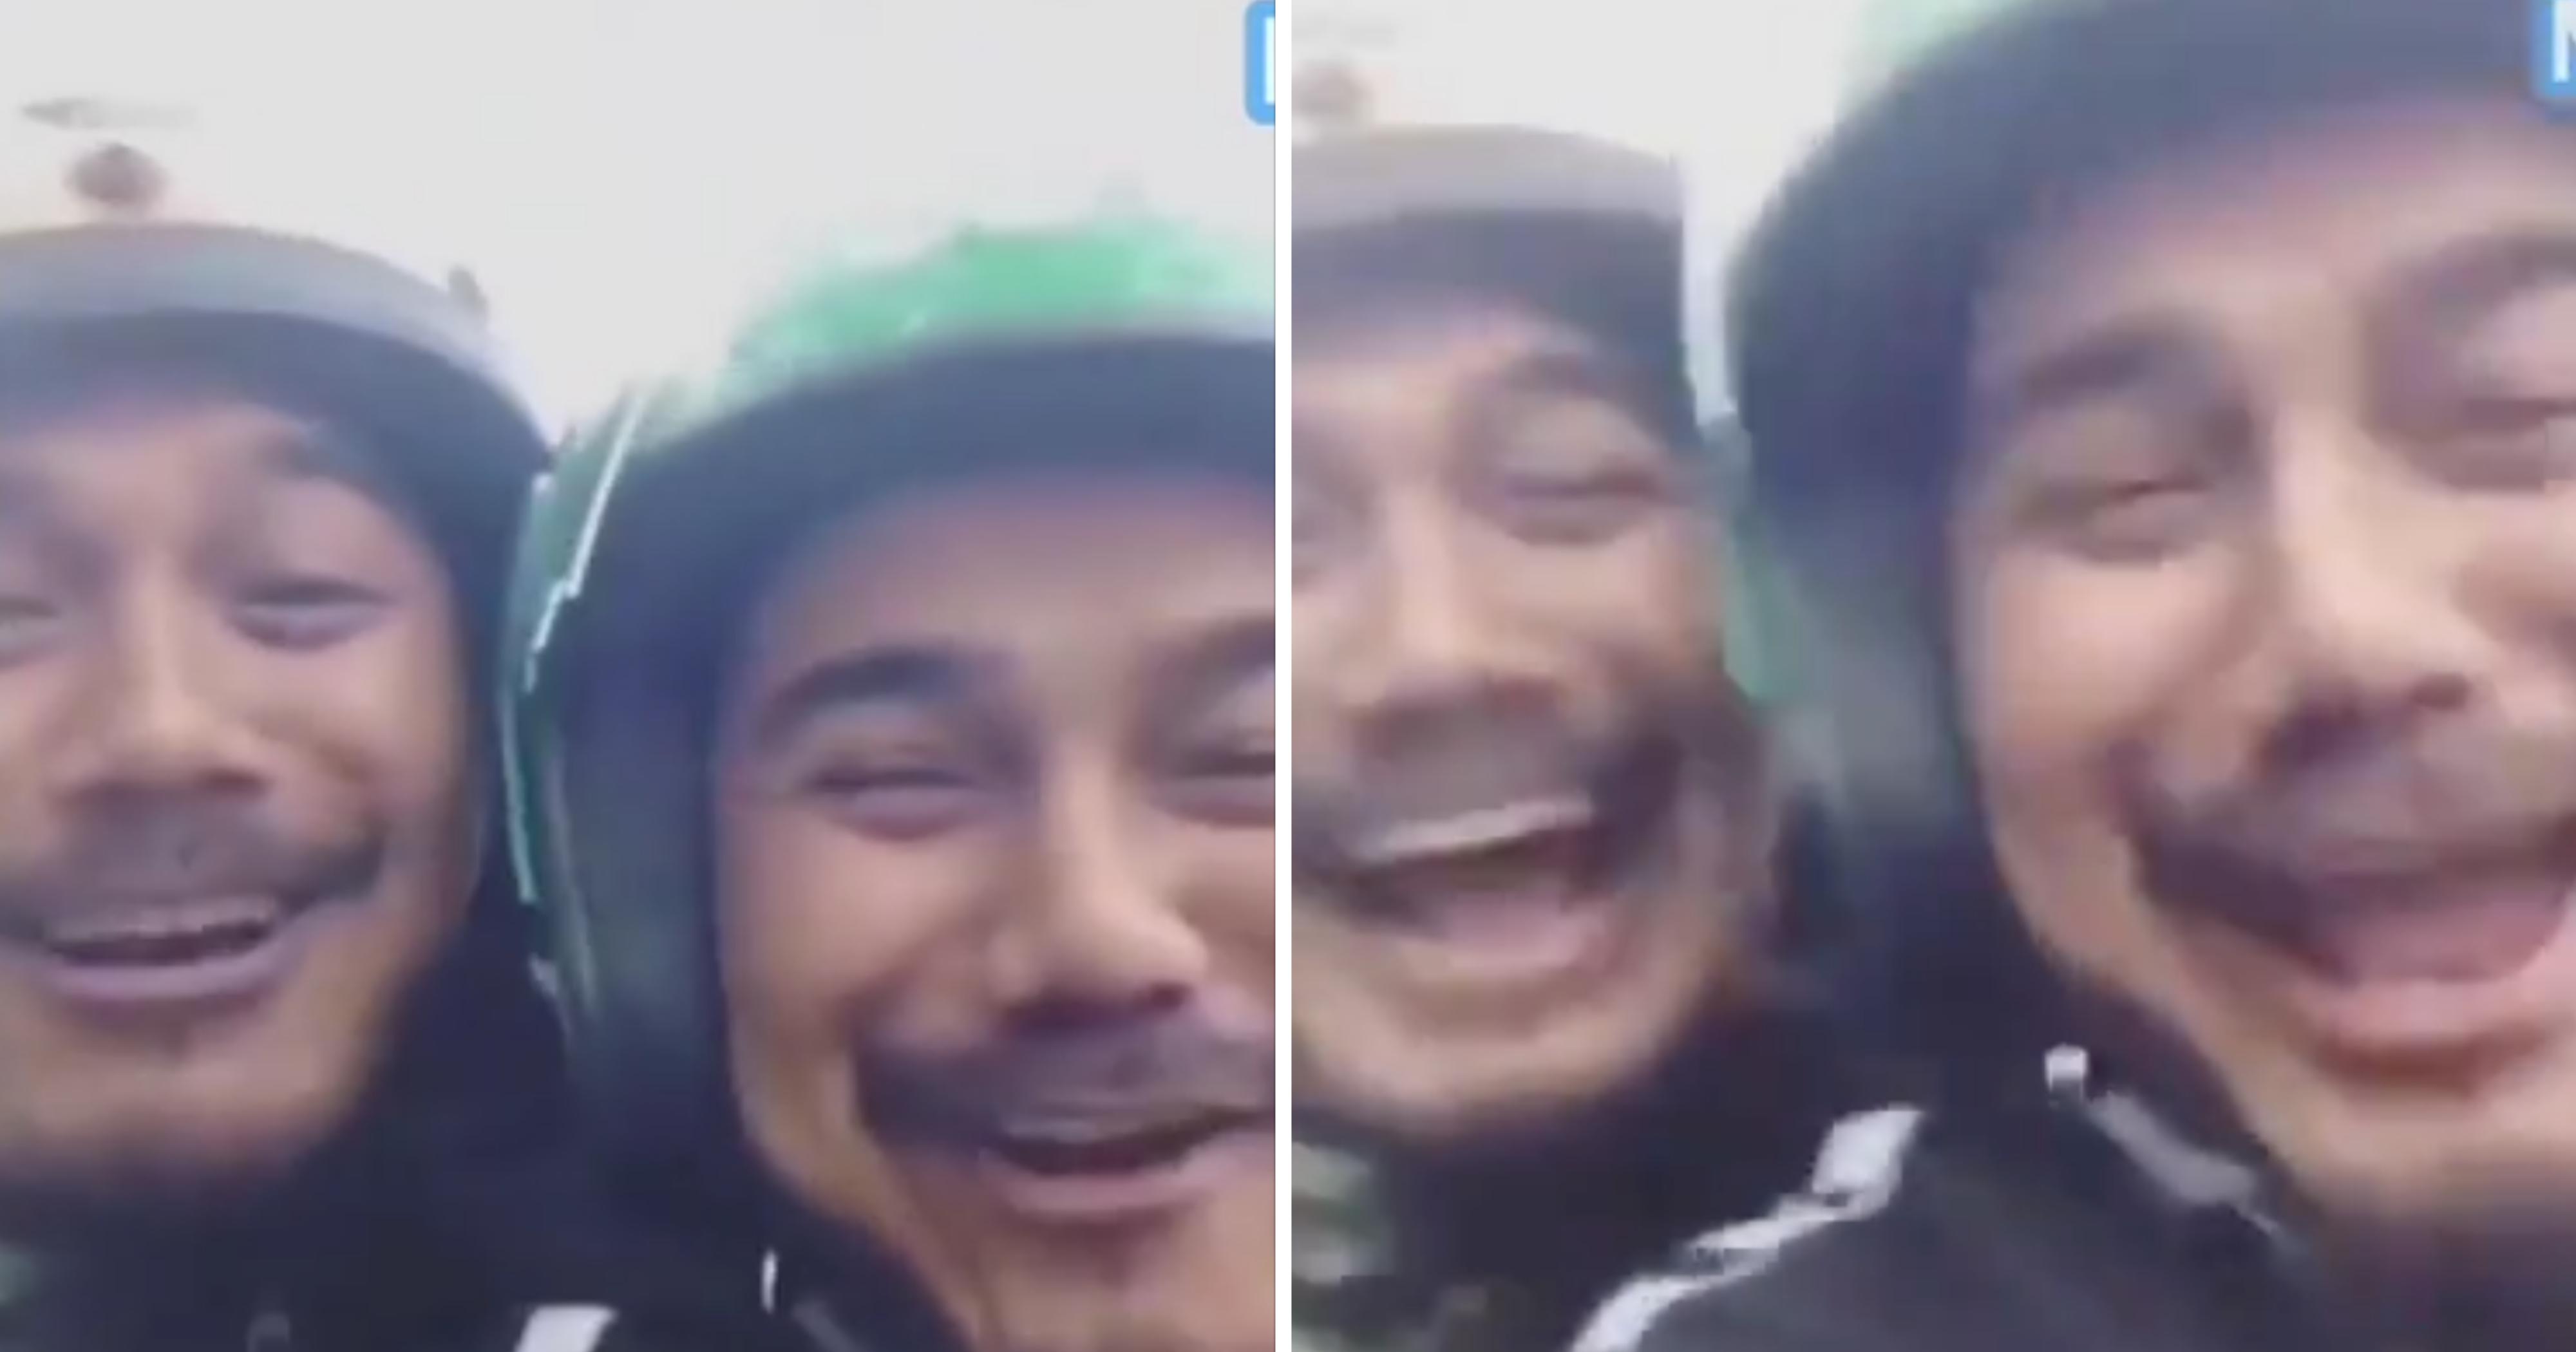 Grab Rider Gets Surprised When The Passenger He Picks Looks Exactly Like Him